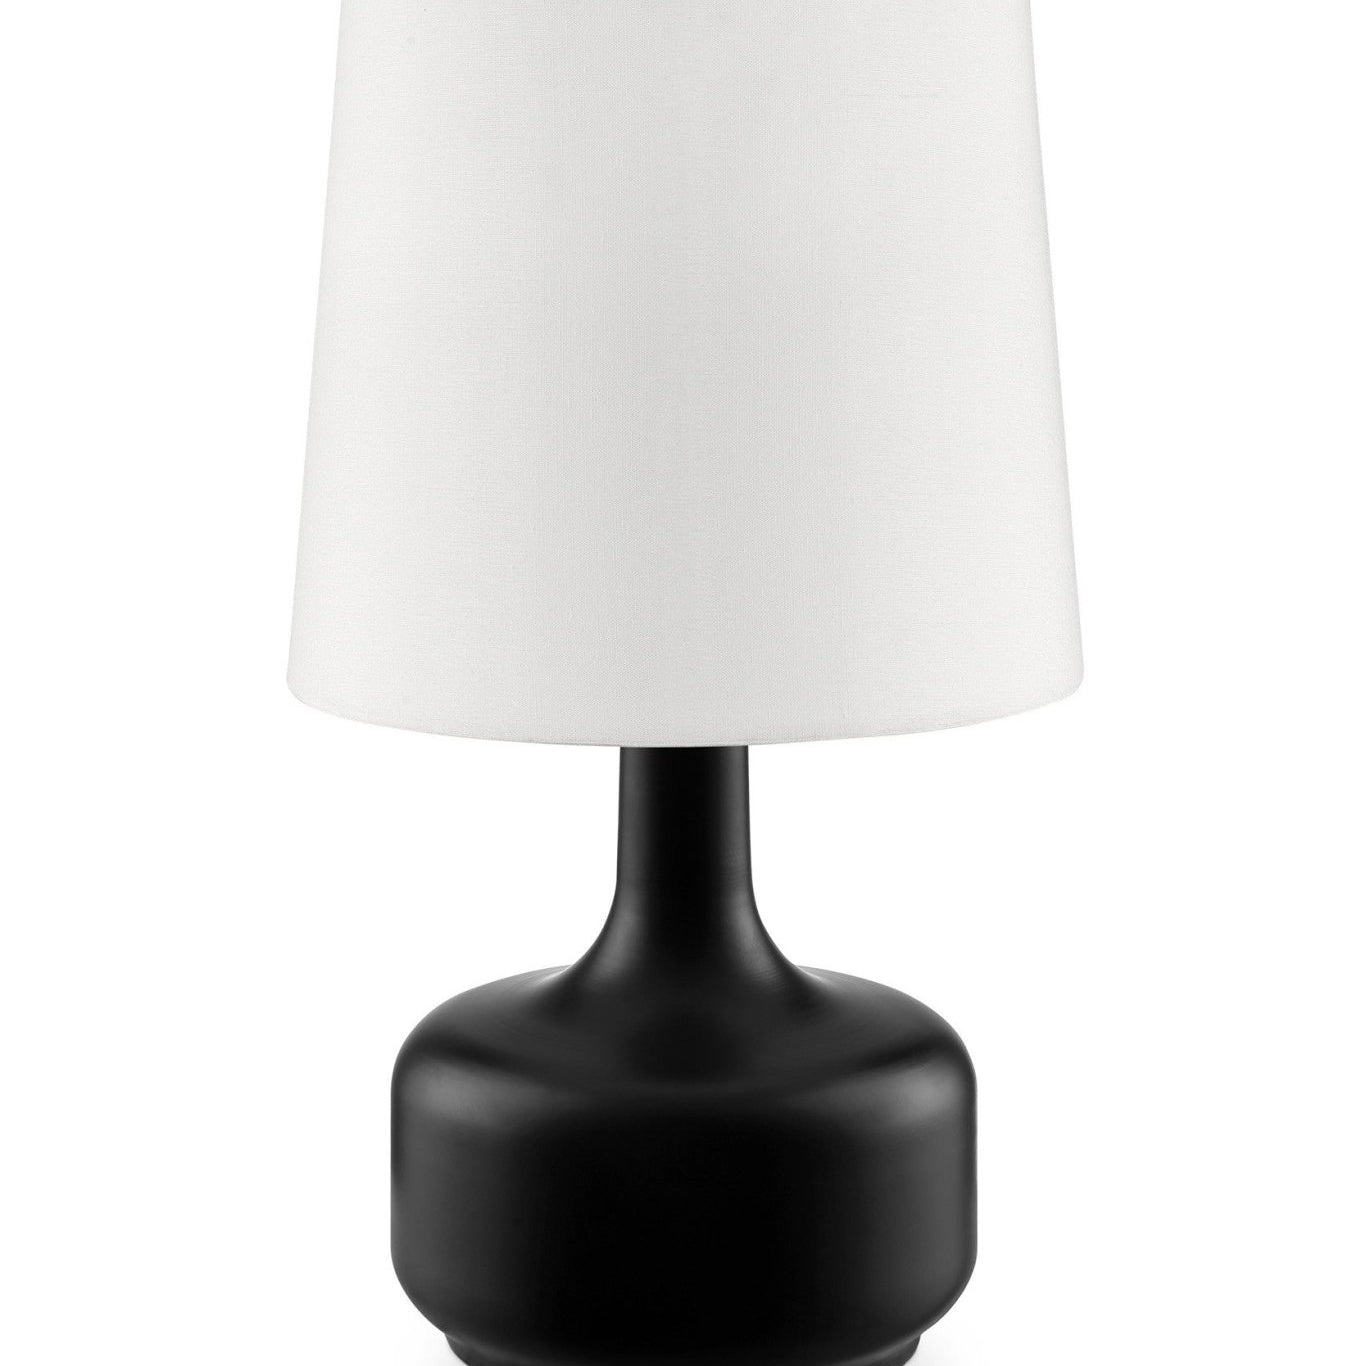 17" Black Metal Bedside Table Lamp With White Shade - Tuesday Morning-Table Lamps